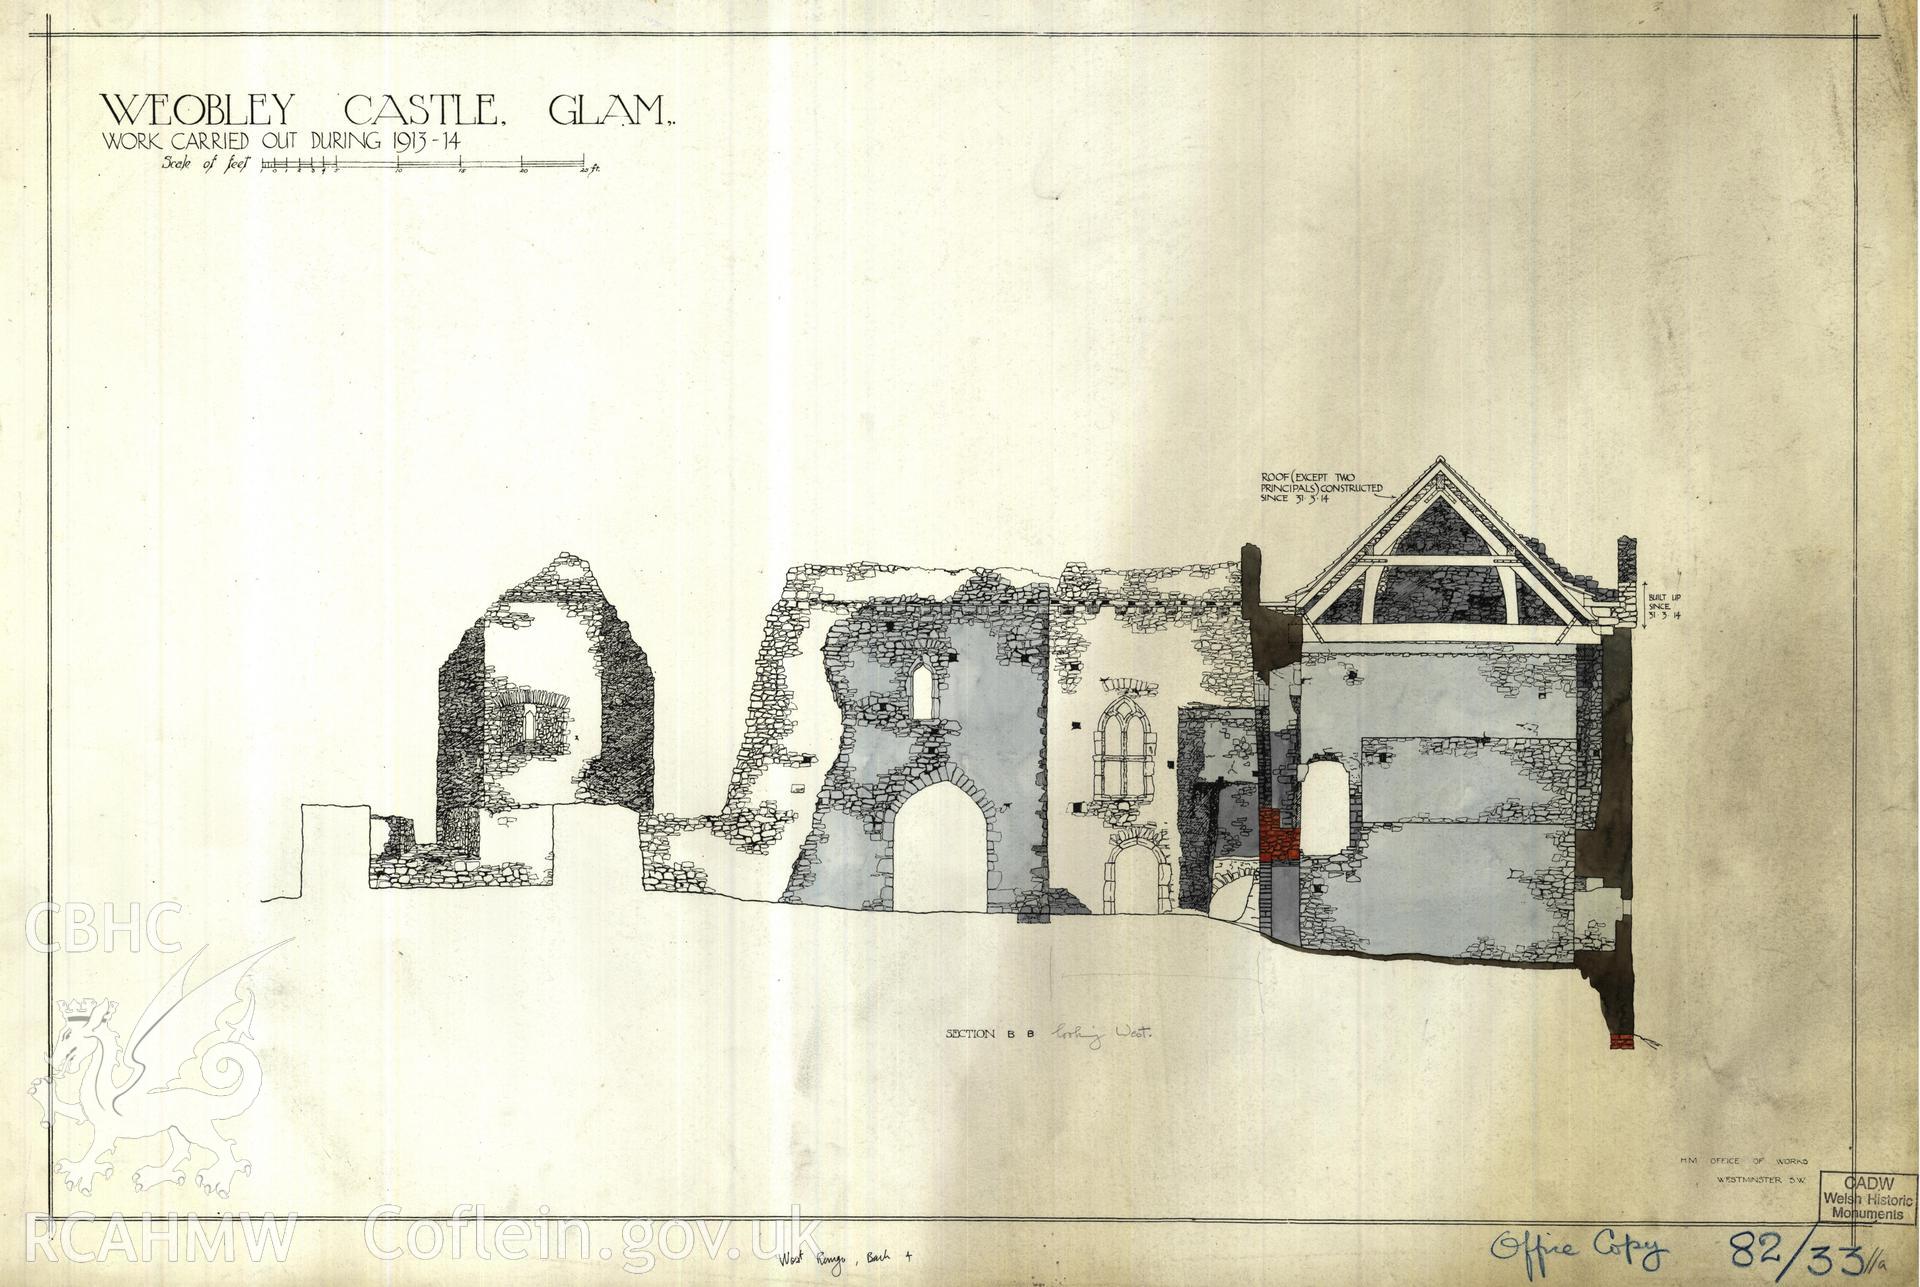 Cadw guardianship monument drawing of Weobley Castle. W range, rear elevation, final print. Cadw Ref. No:82/33//a. Scale 1:48.